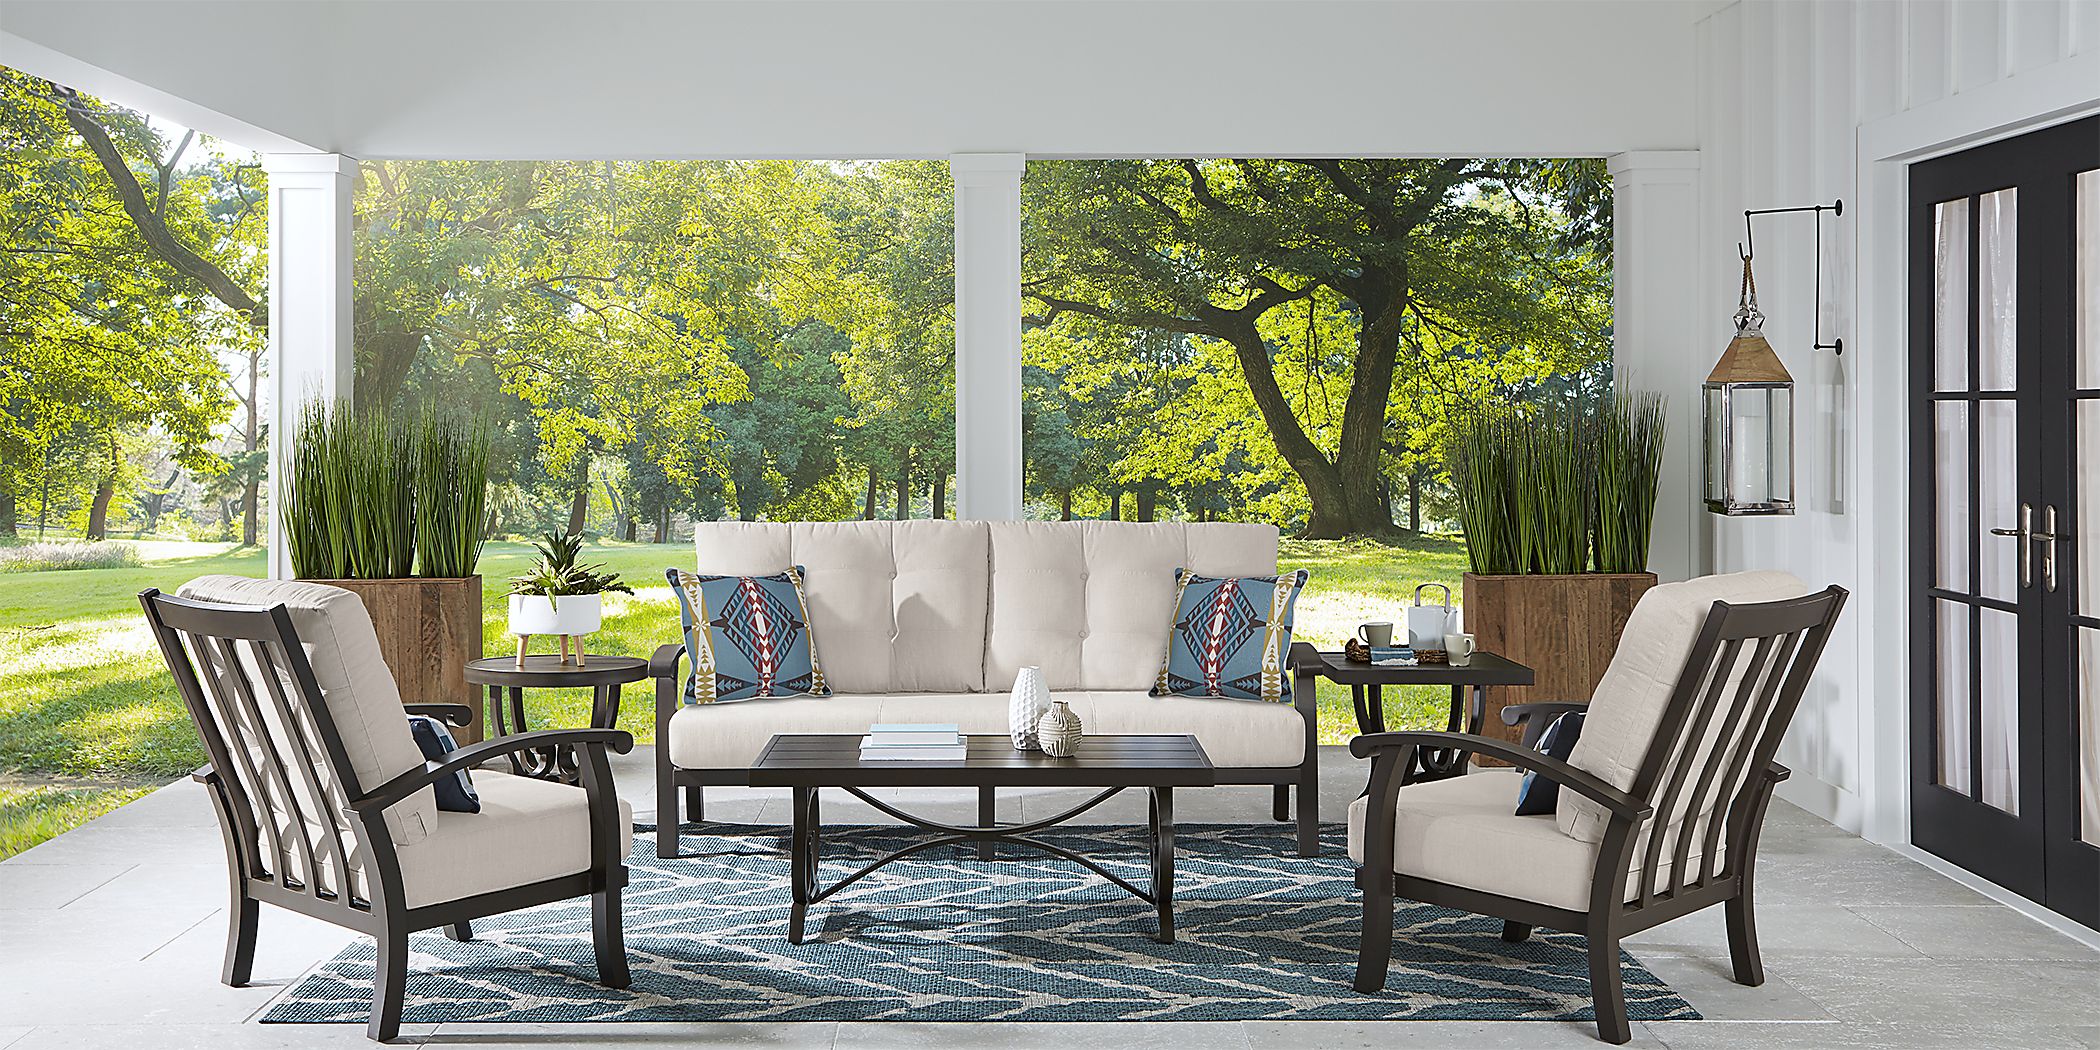 Lake Breeze Aged Bronze Outdoor 4 Pc Seating Set with Wren Cushions